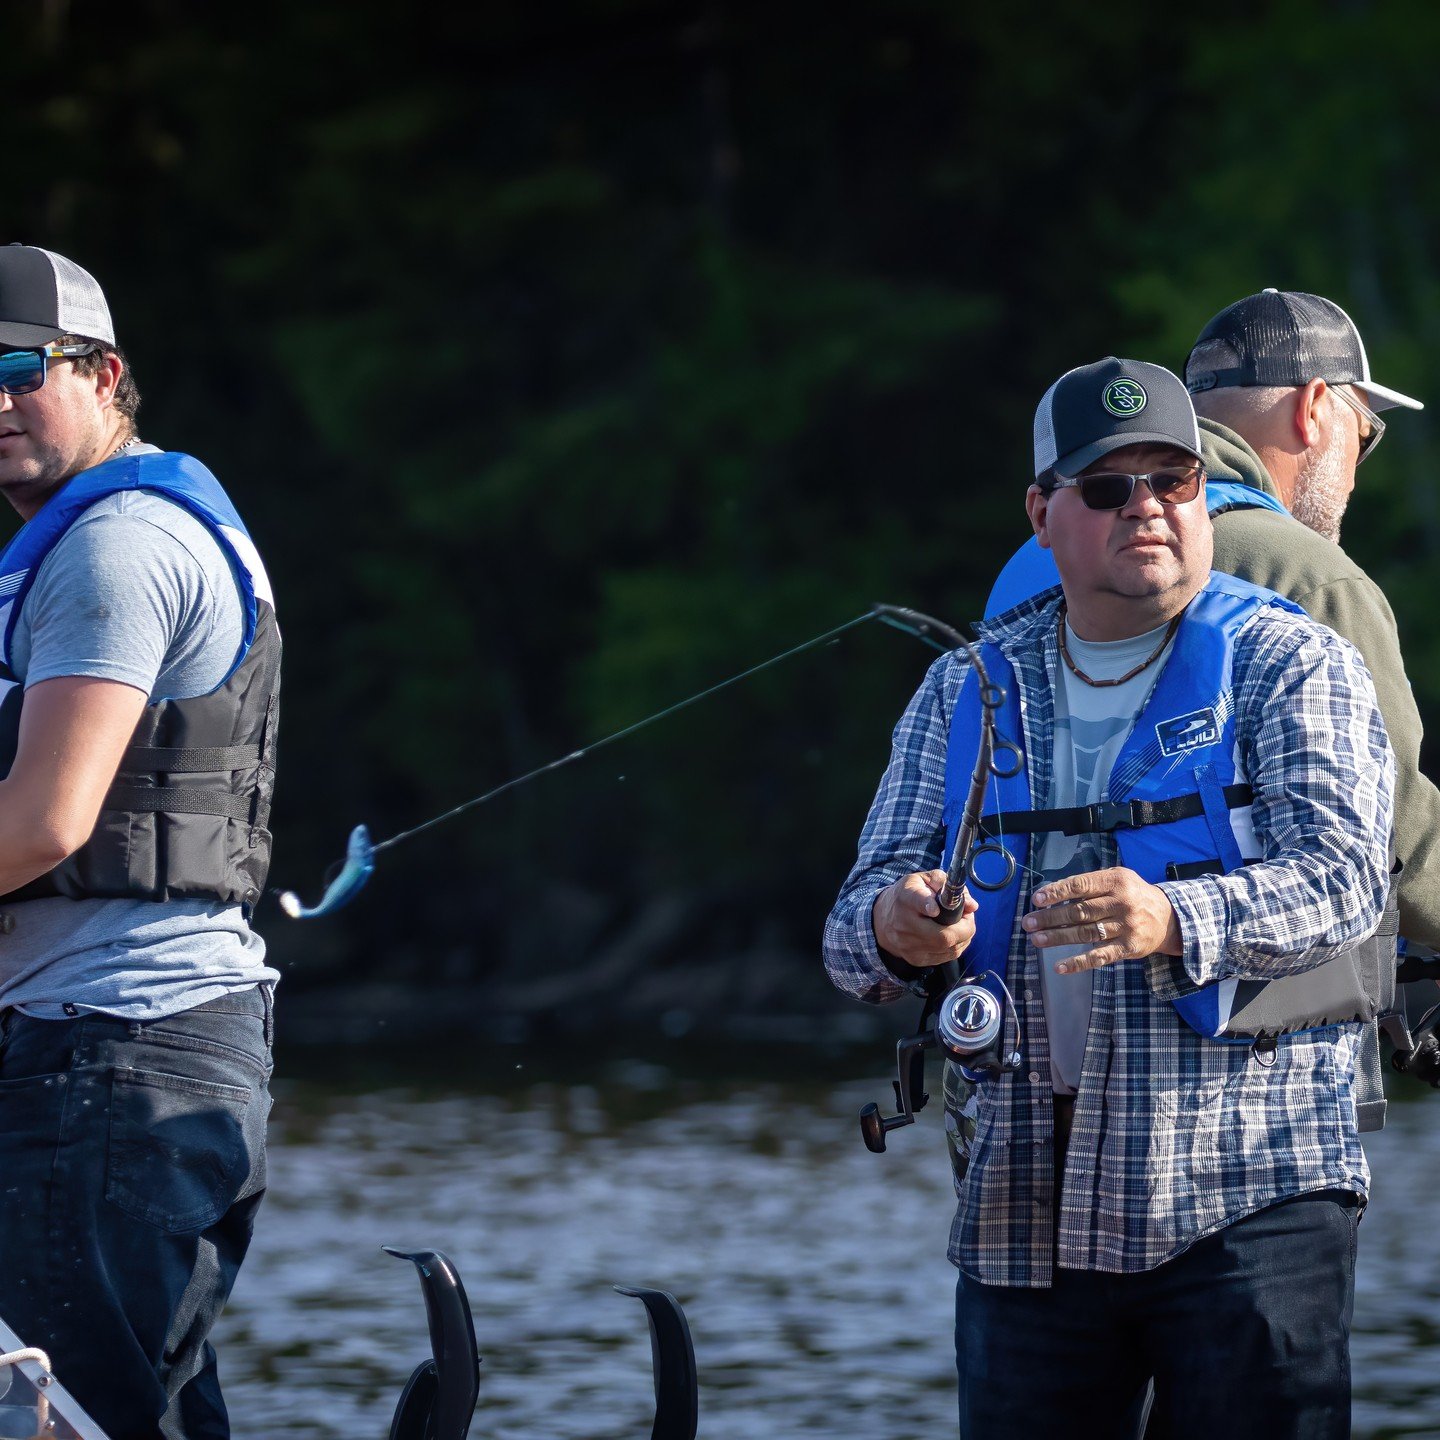 The fish are certainly biting in Miramichi! With two fishing tournaments behind us in our region, and the Miramichi Striper Cup happening this weekend, everyone is talking fishing!